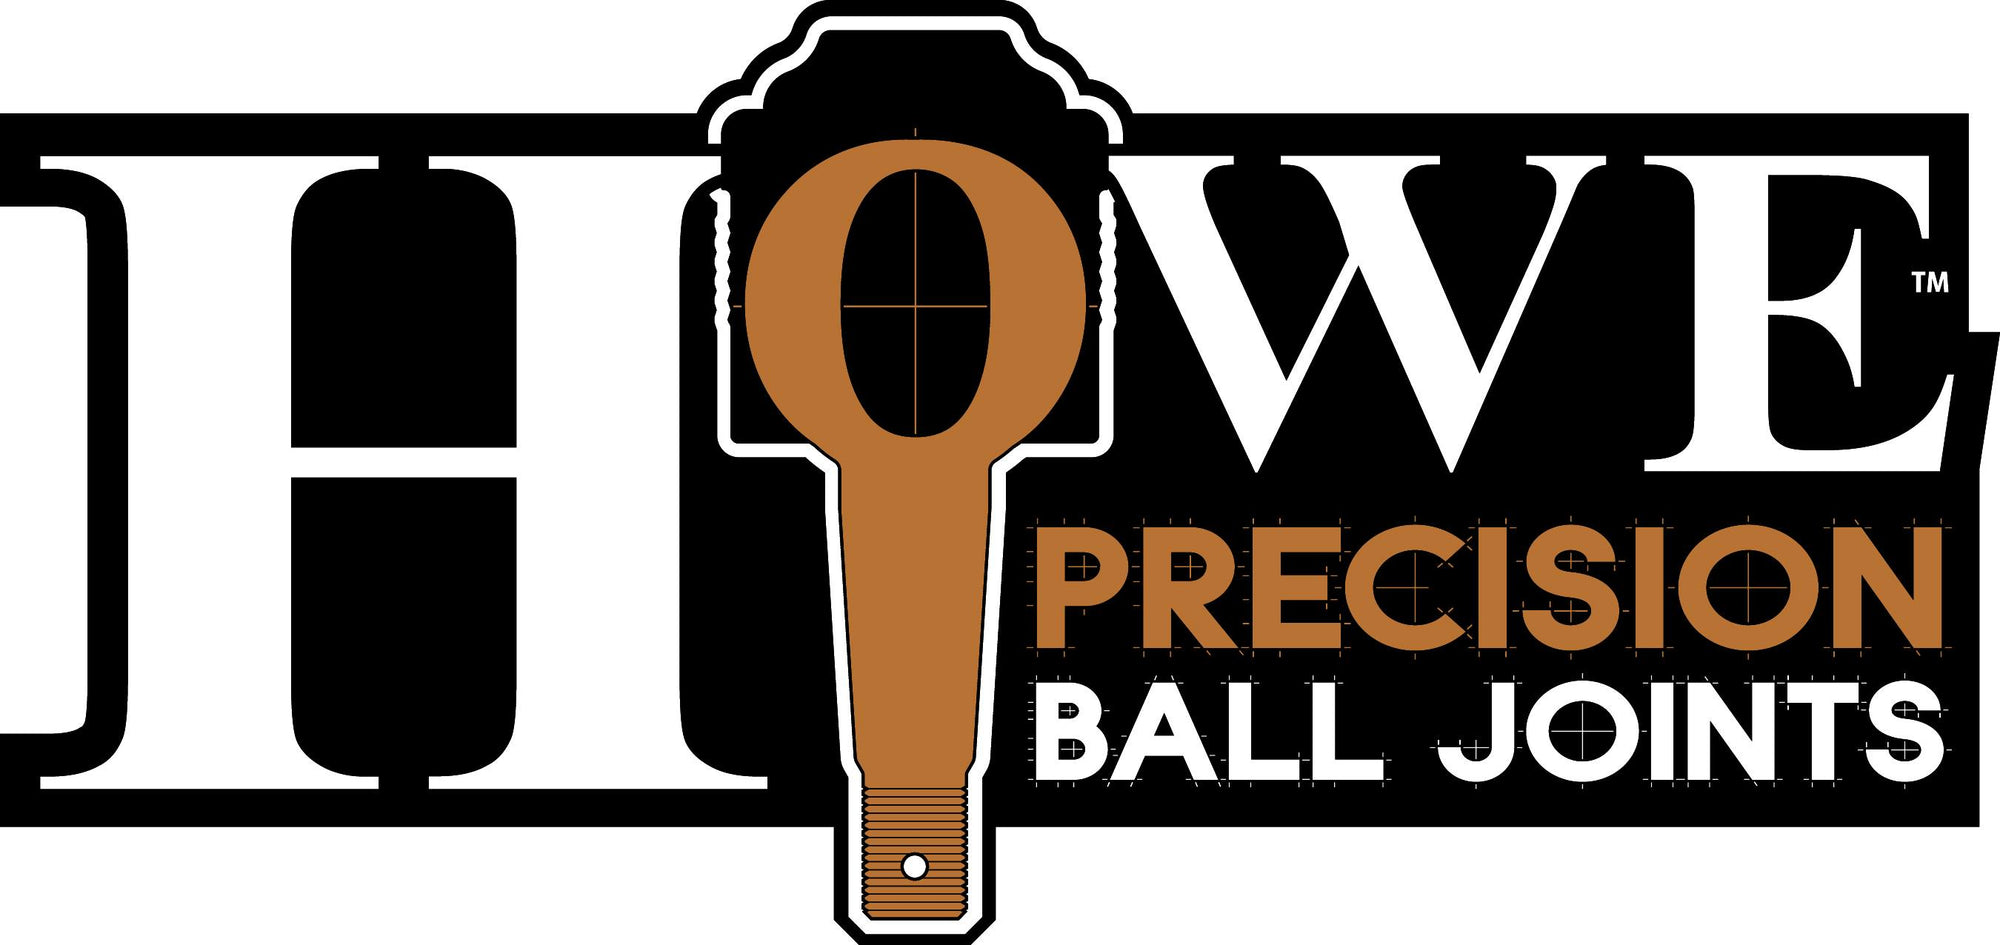 Updated Logo for Howe Ball Joints